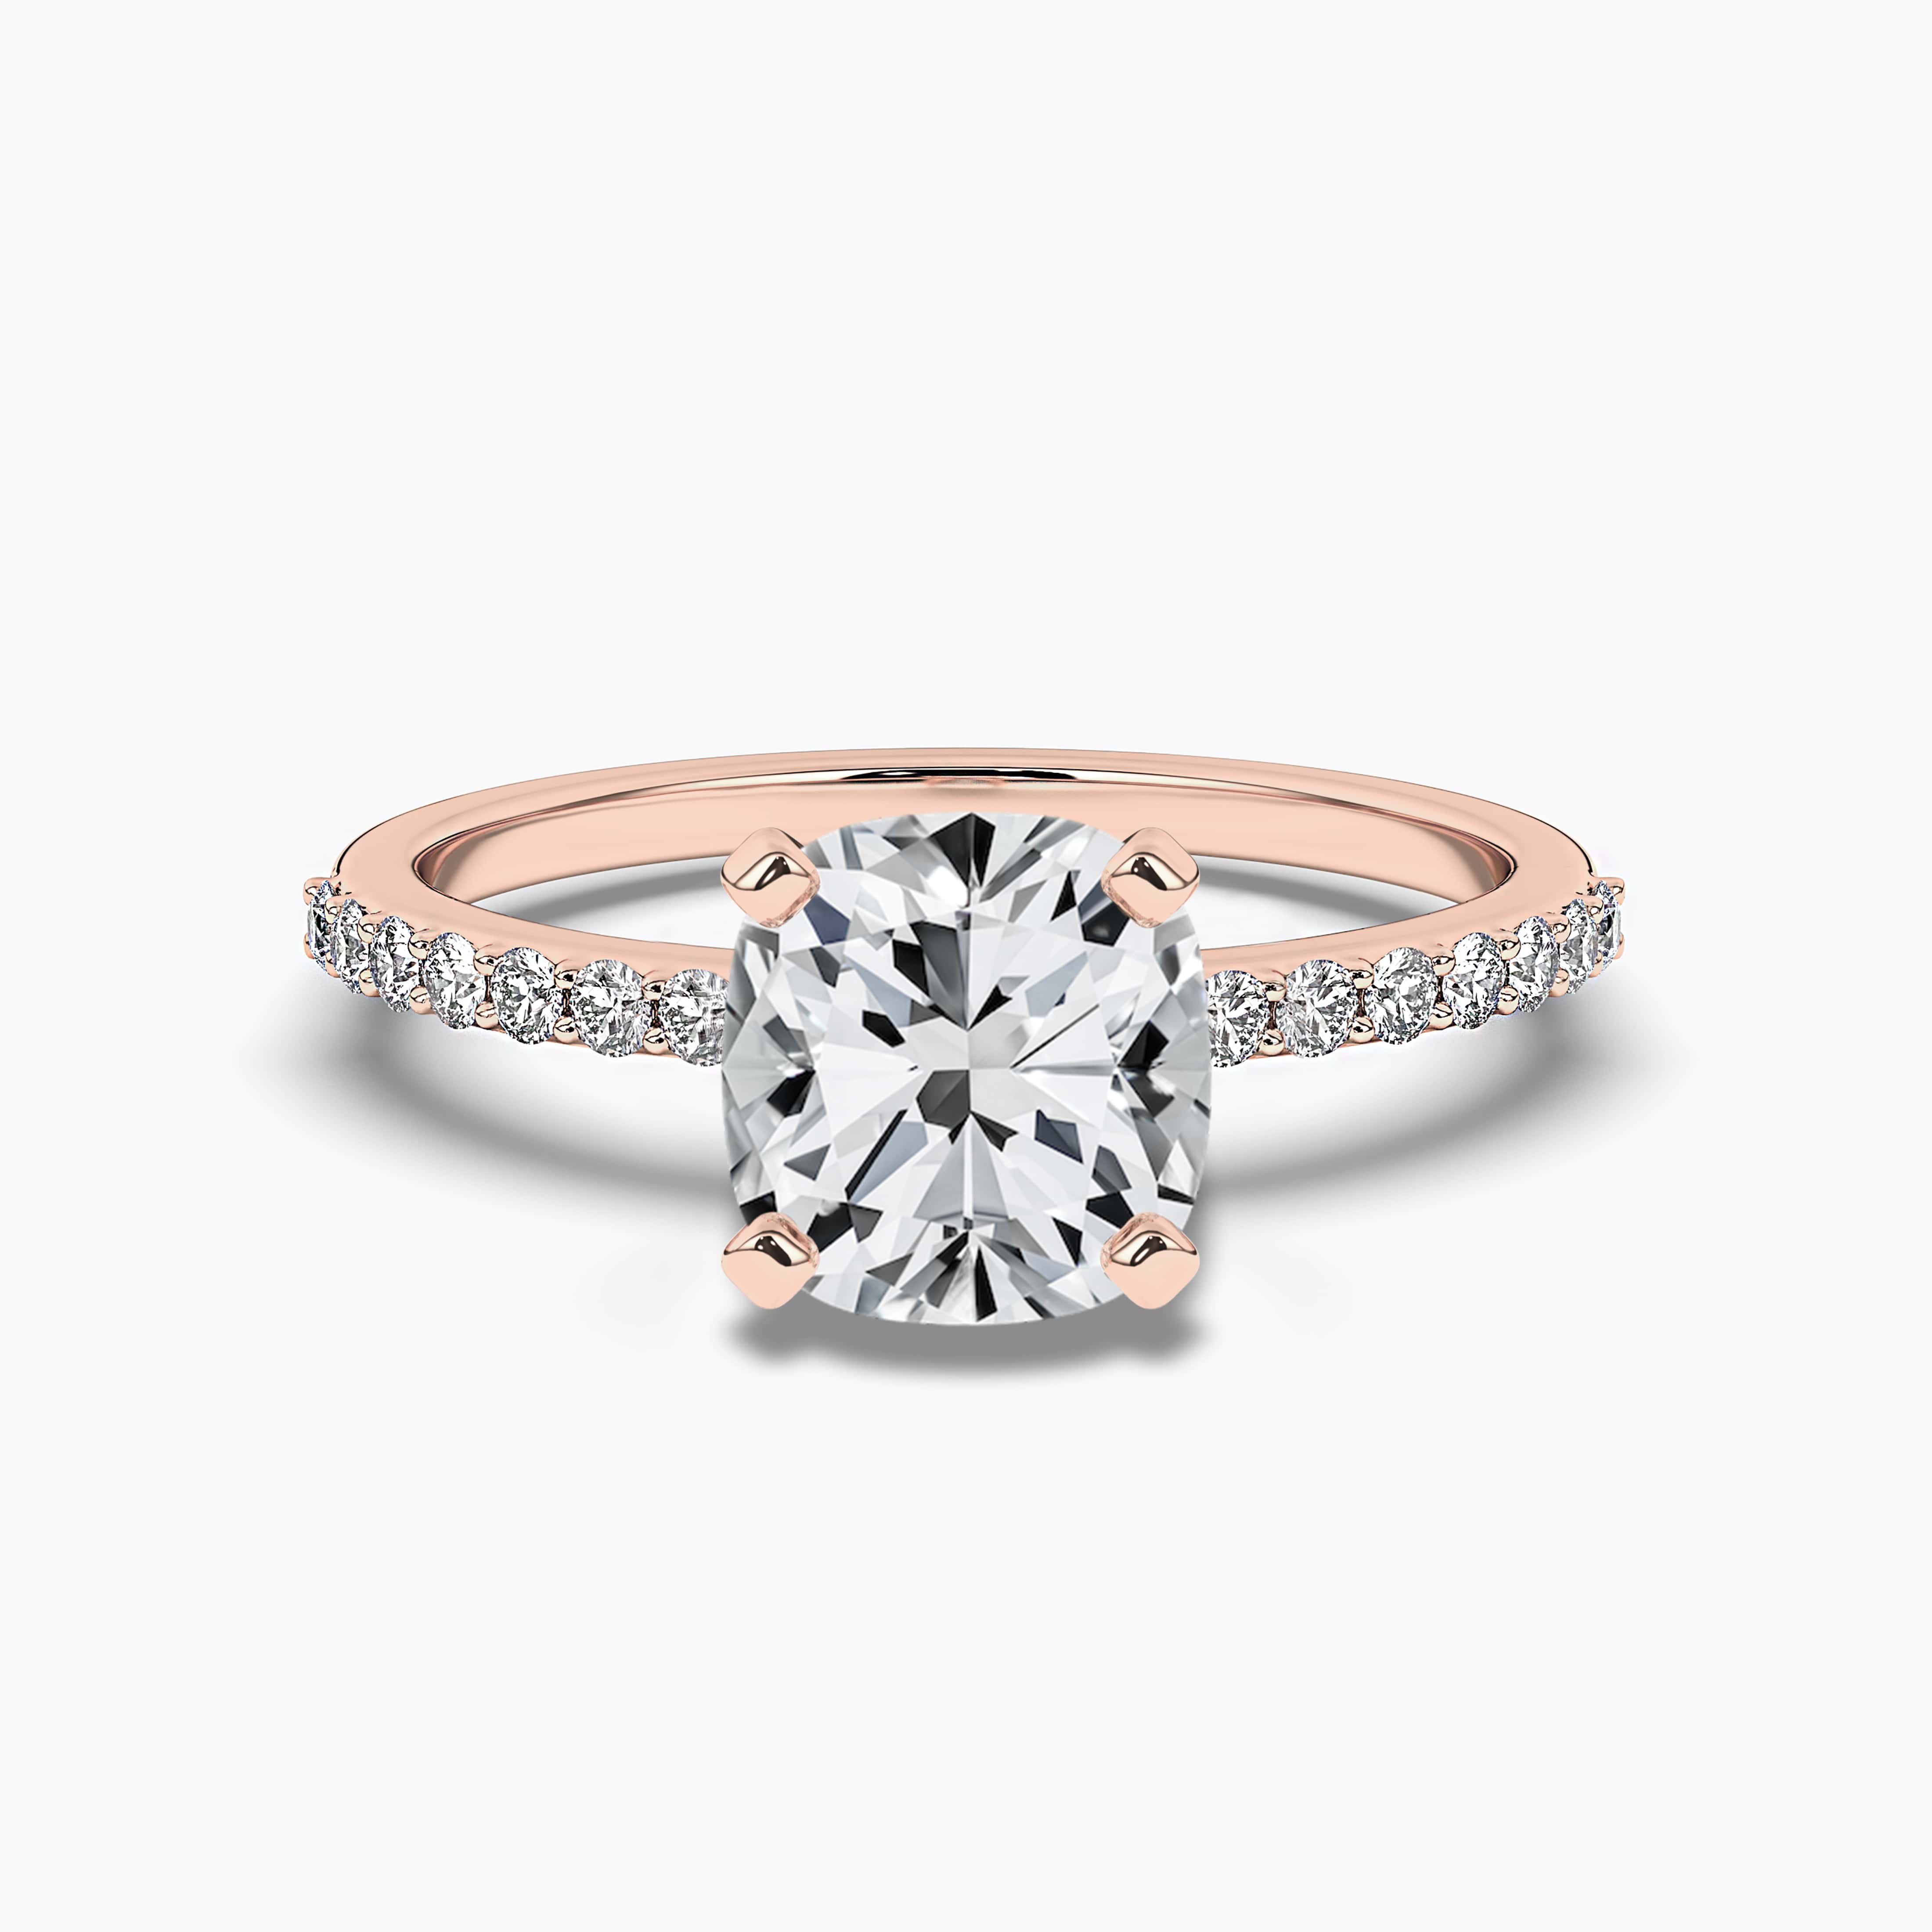 Cushion-Cut Diamond Frame Engagement Ring in Rose Gold